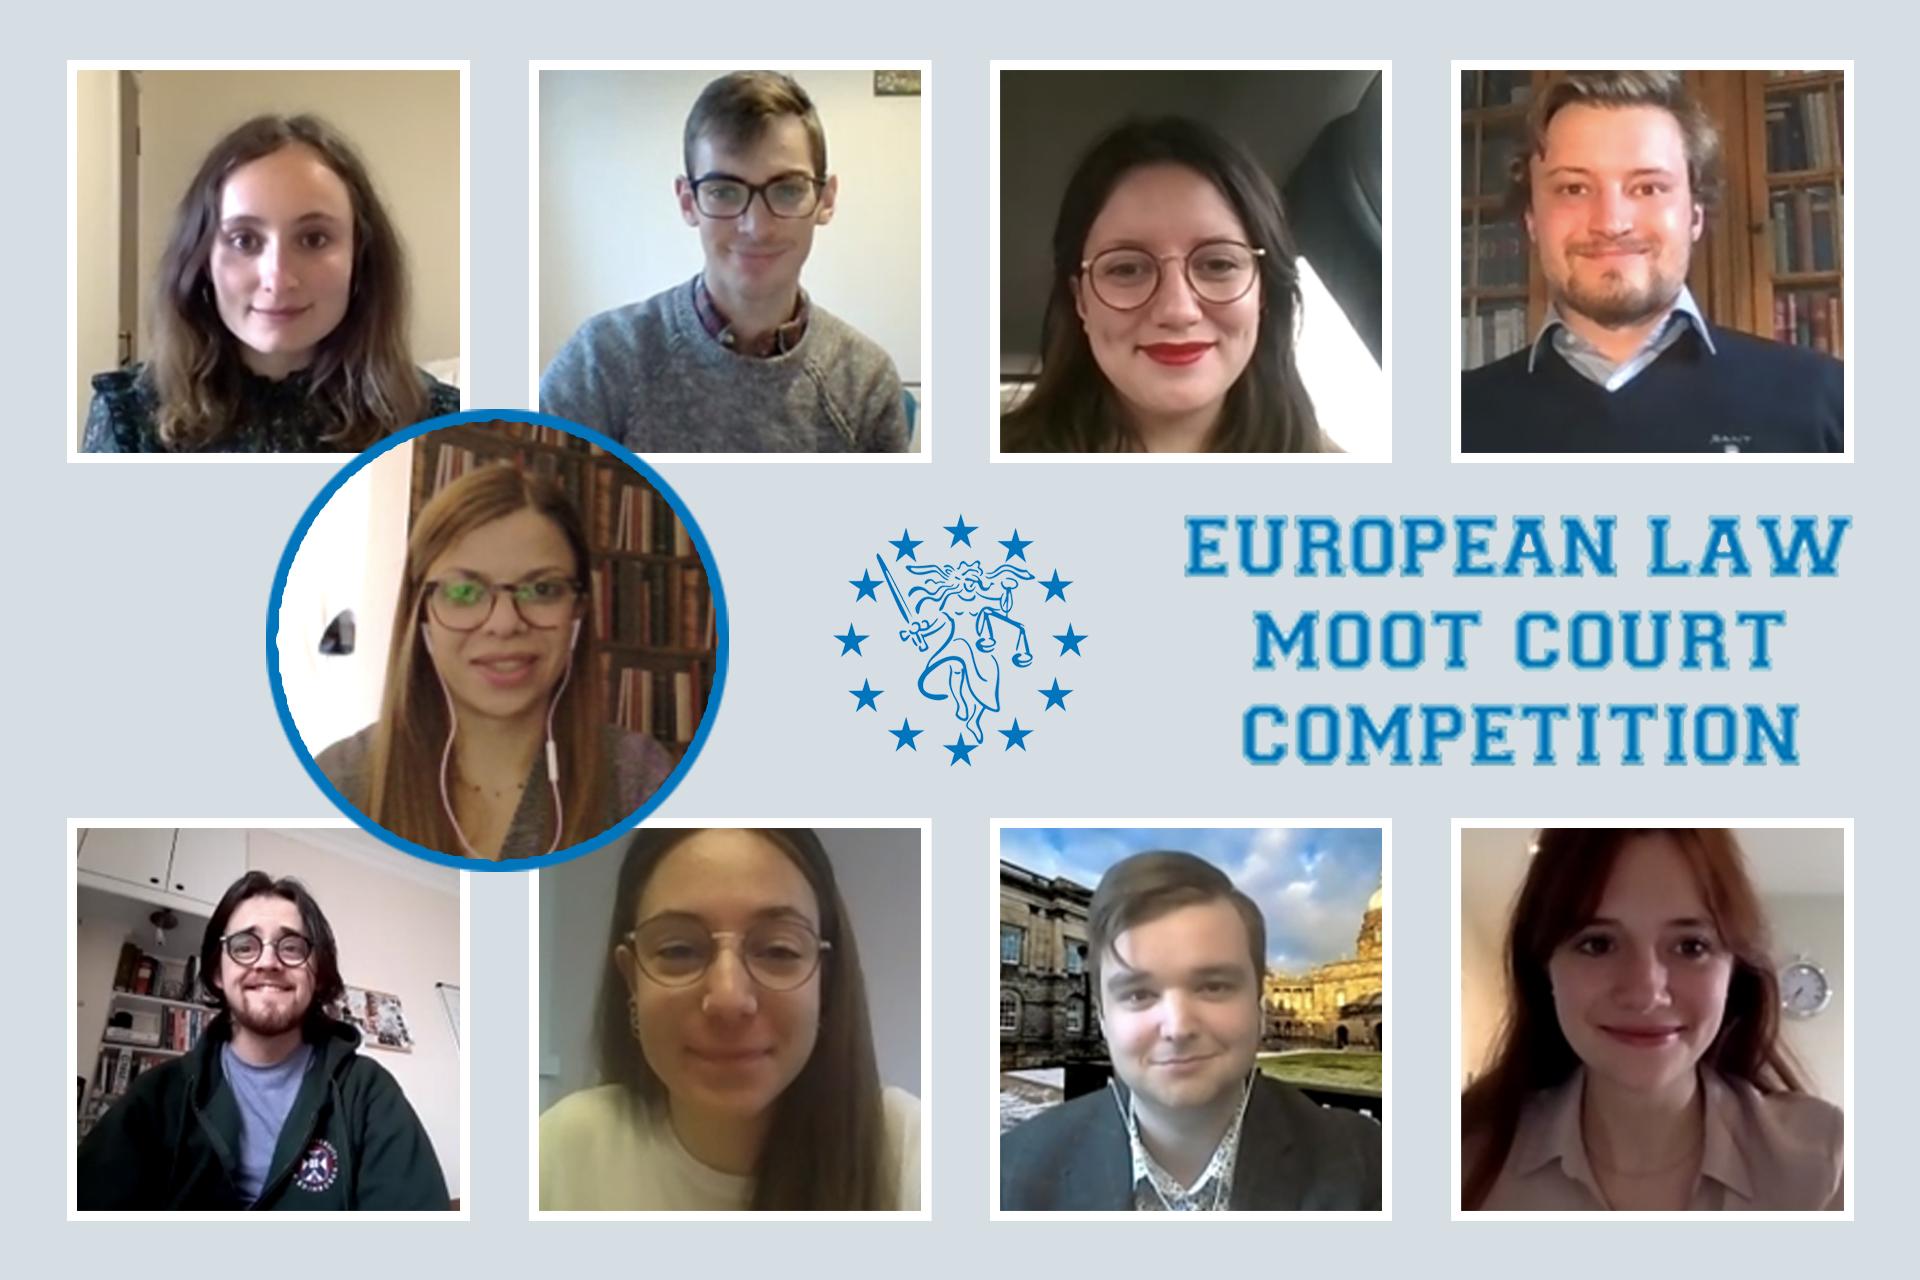 European Law Moot Court Competition